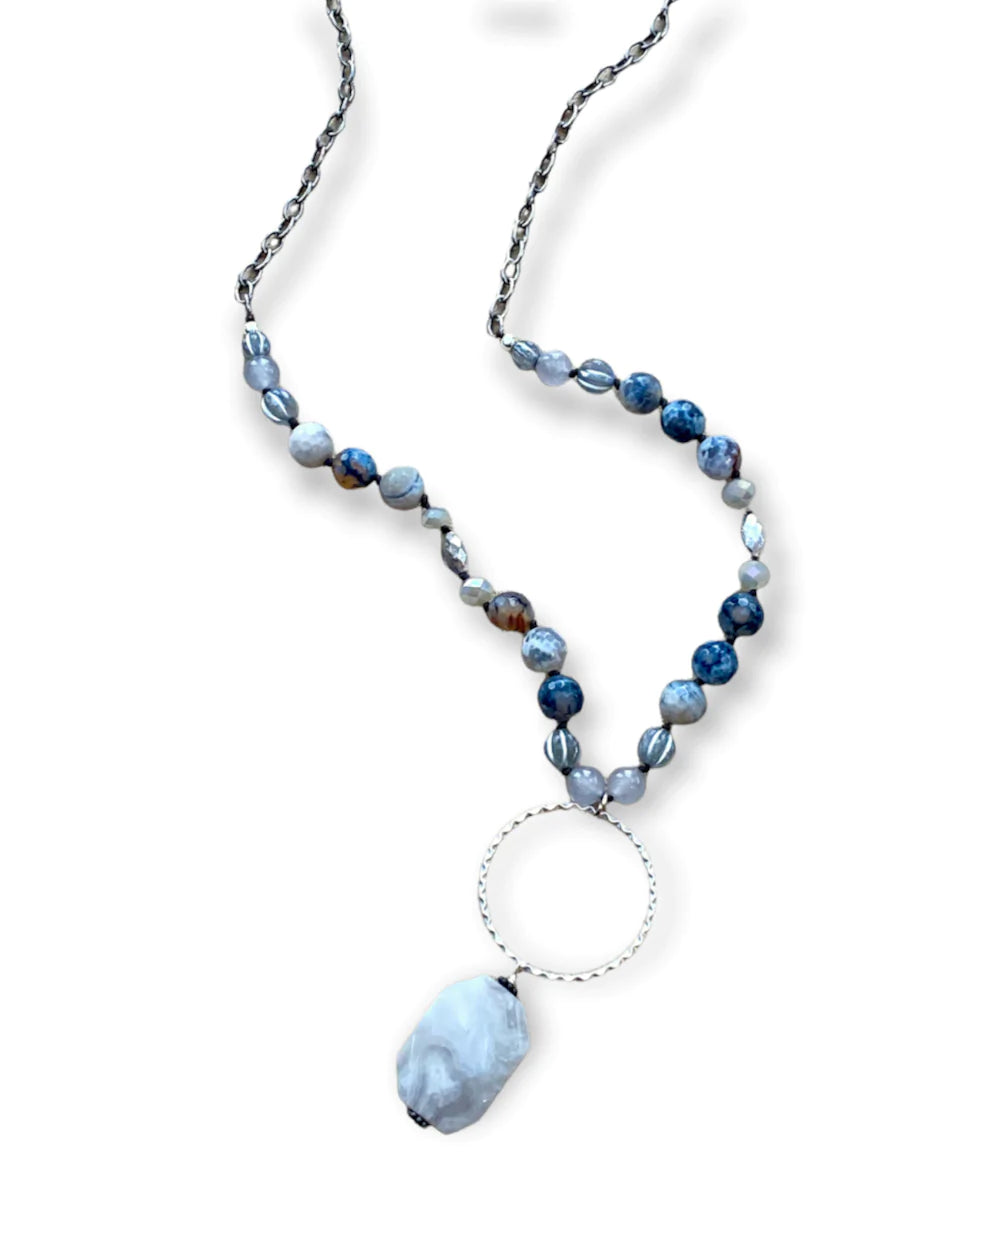 Inspire Designs Cloudy Skies Necklace